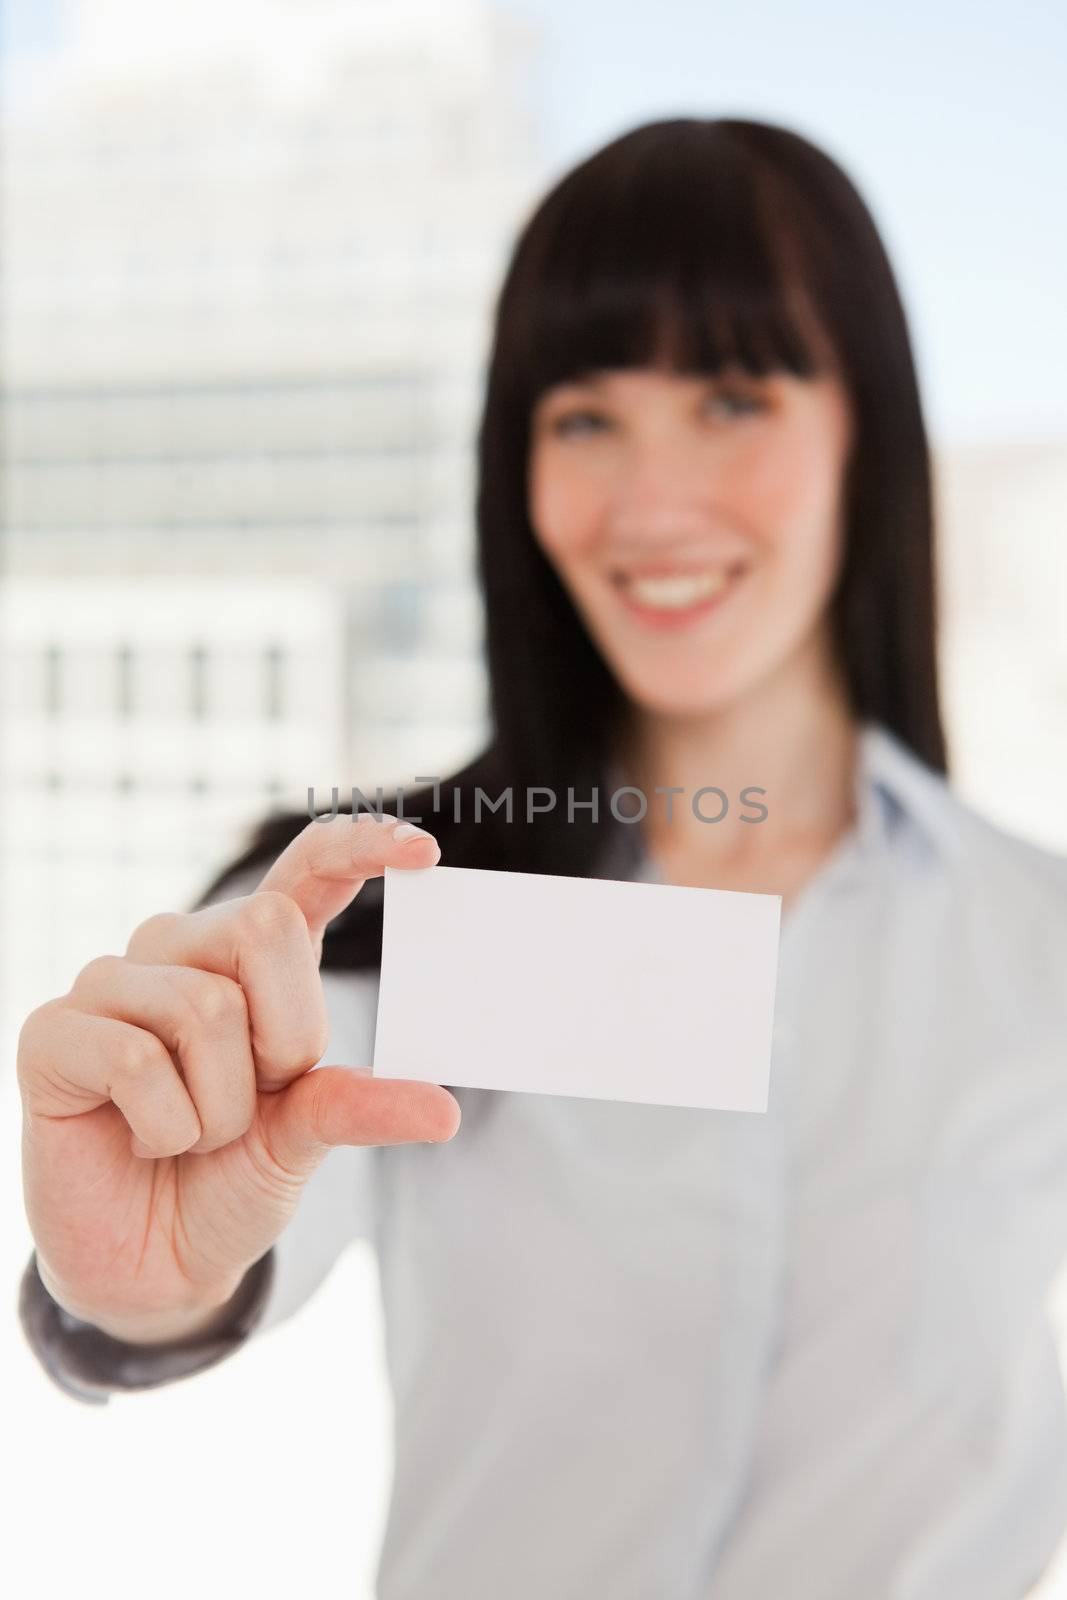 A focused shot on the business card as it is held by a business woman